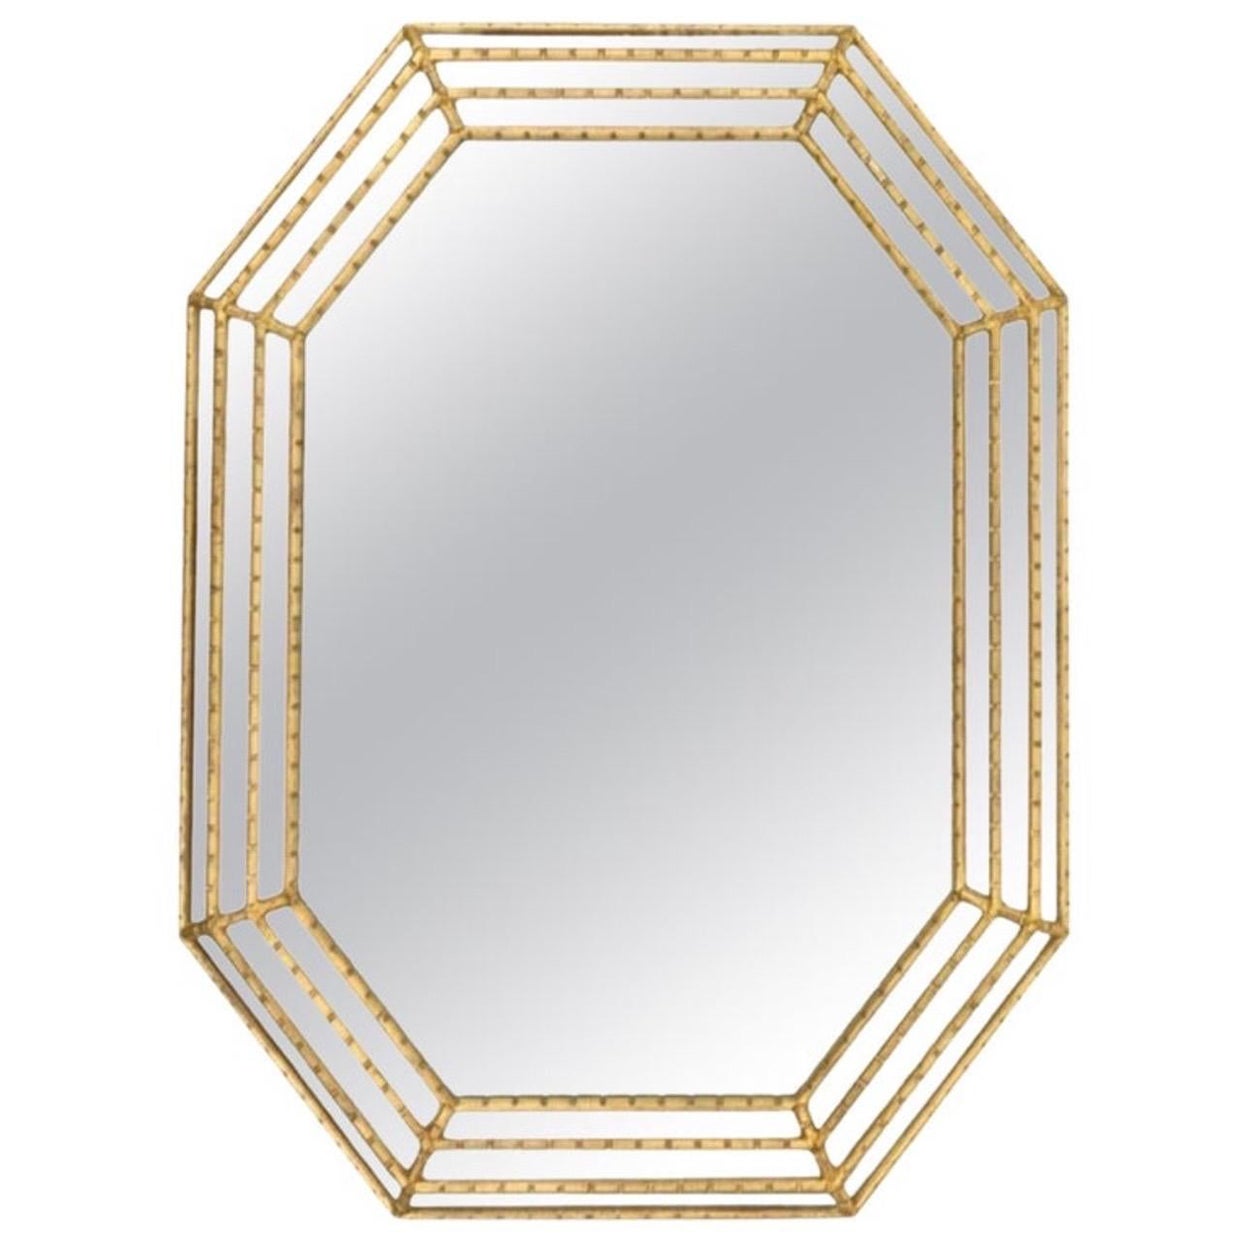 Labarge Gold Faux Bamboo Octagonal Mirror For Sale